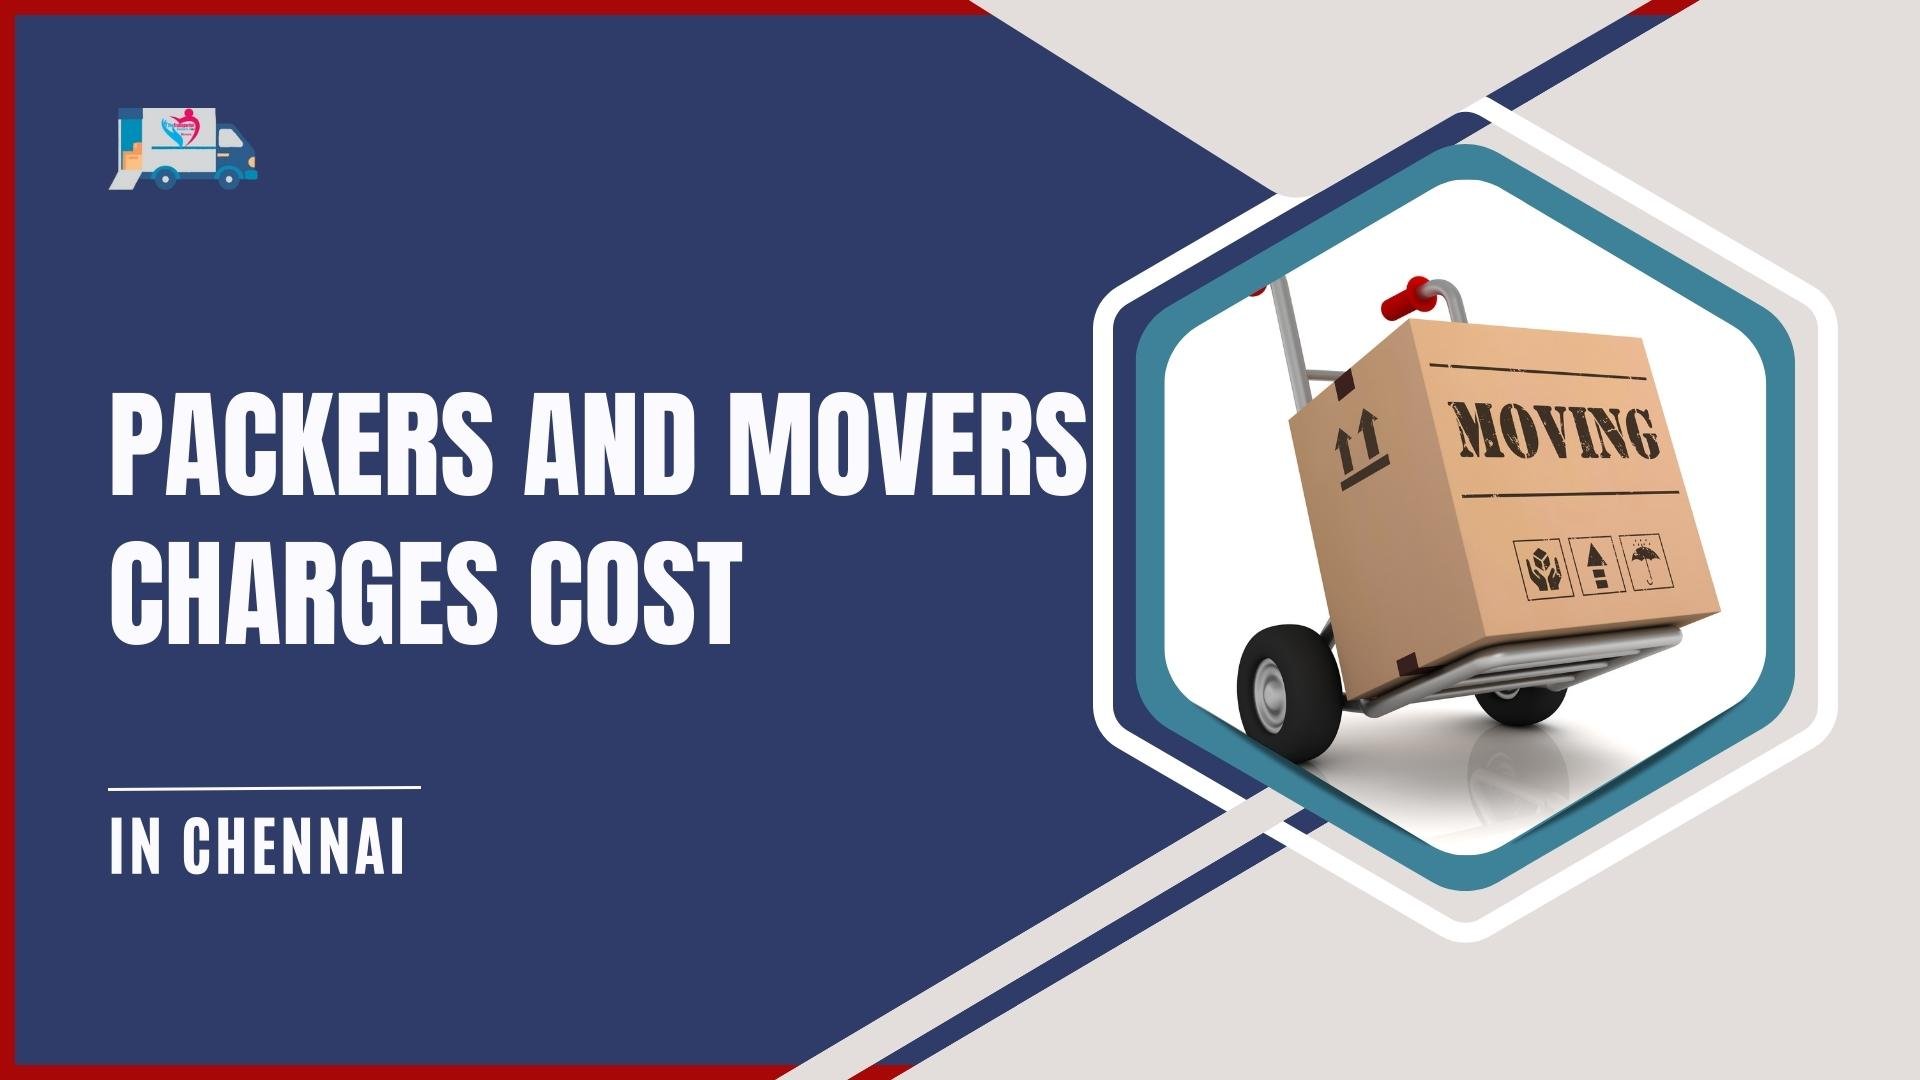 Chennai Packers and Movers Charges | Best Moving Services